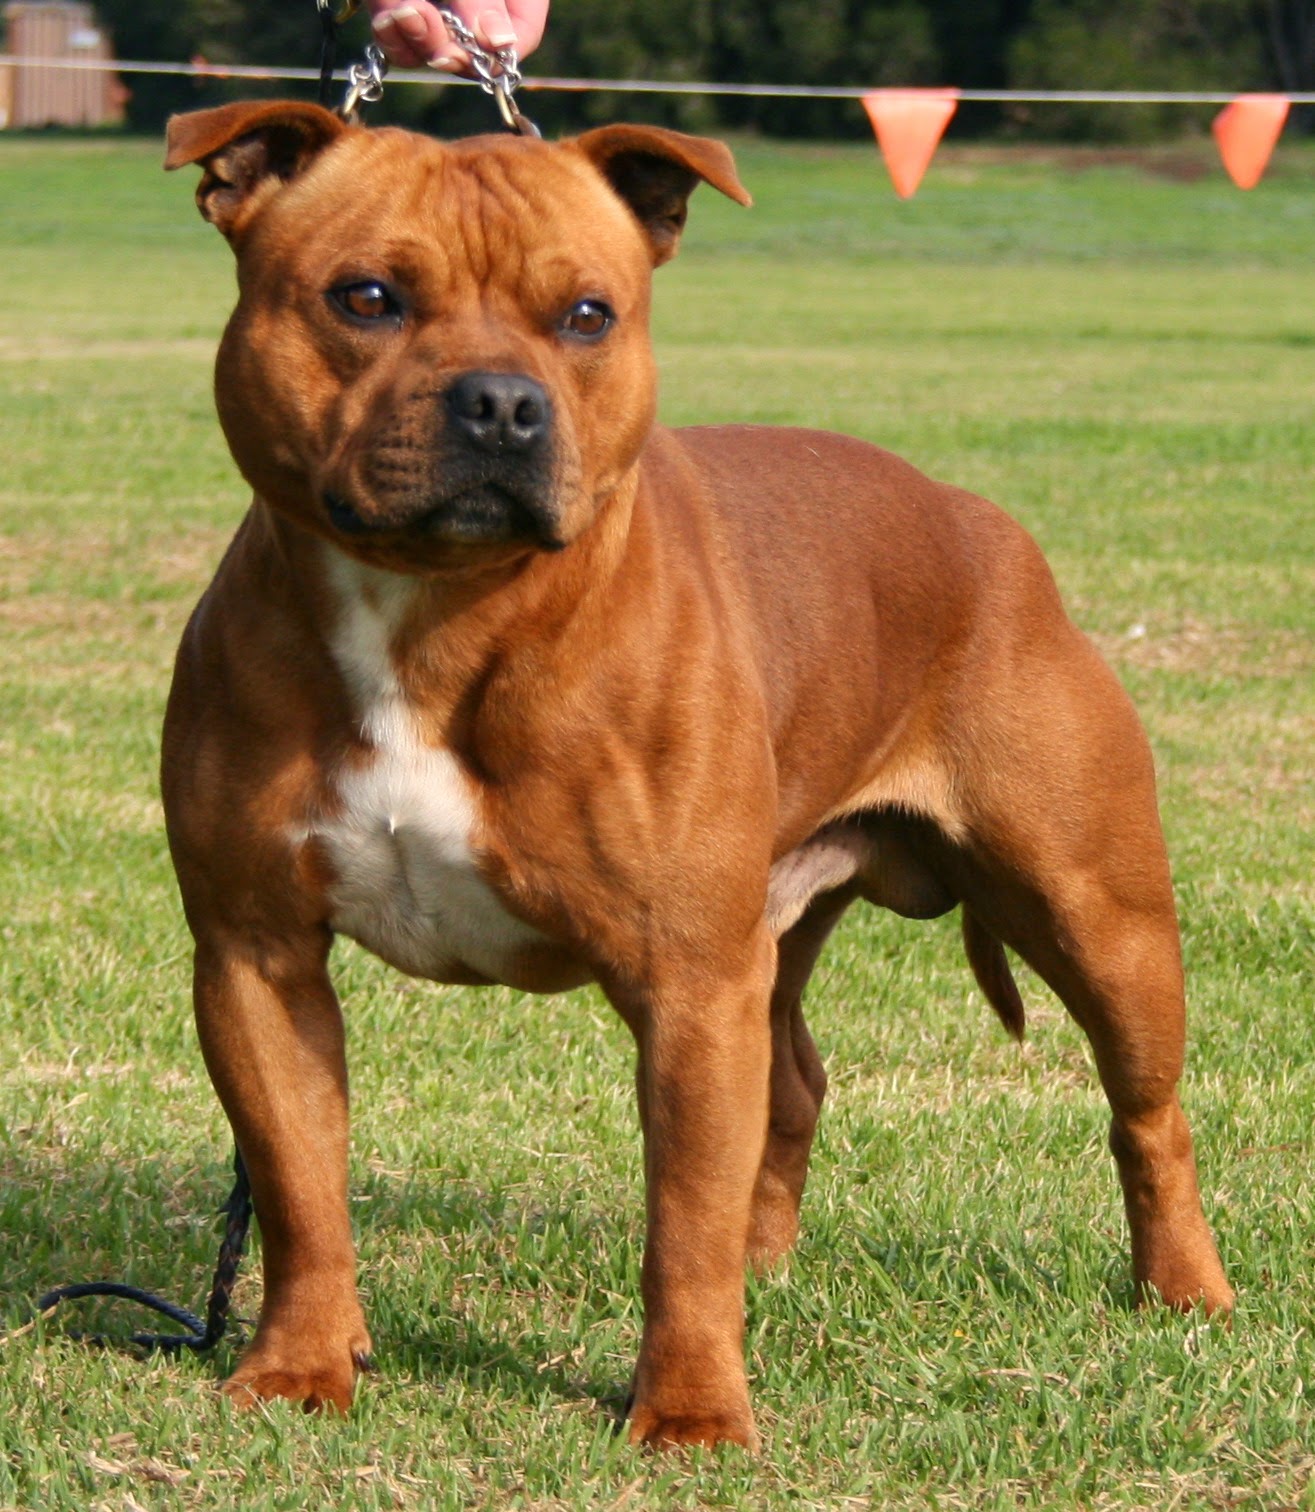 Top 93+ Pictures Staffordshire Bull Terrier Images Full HD, 2k, 4k